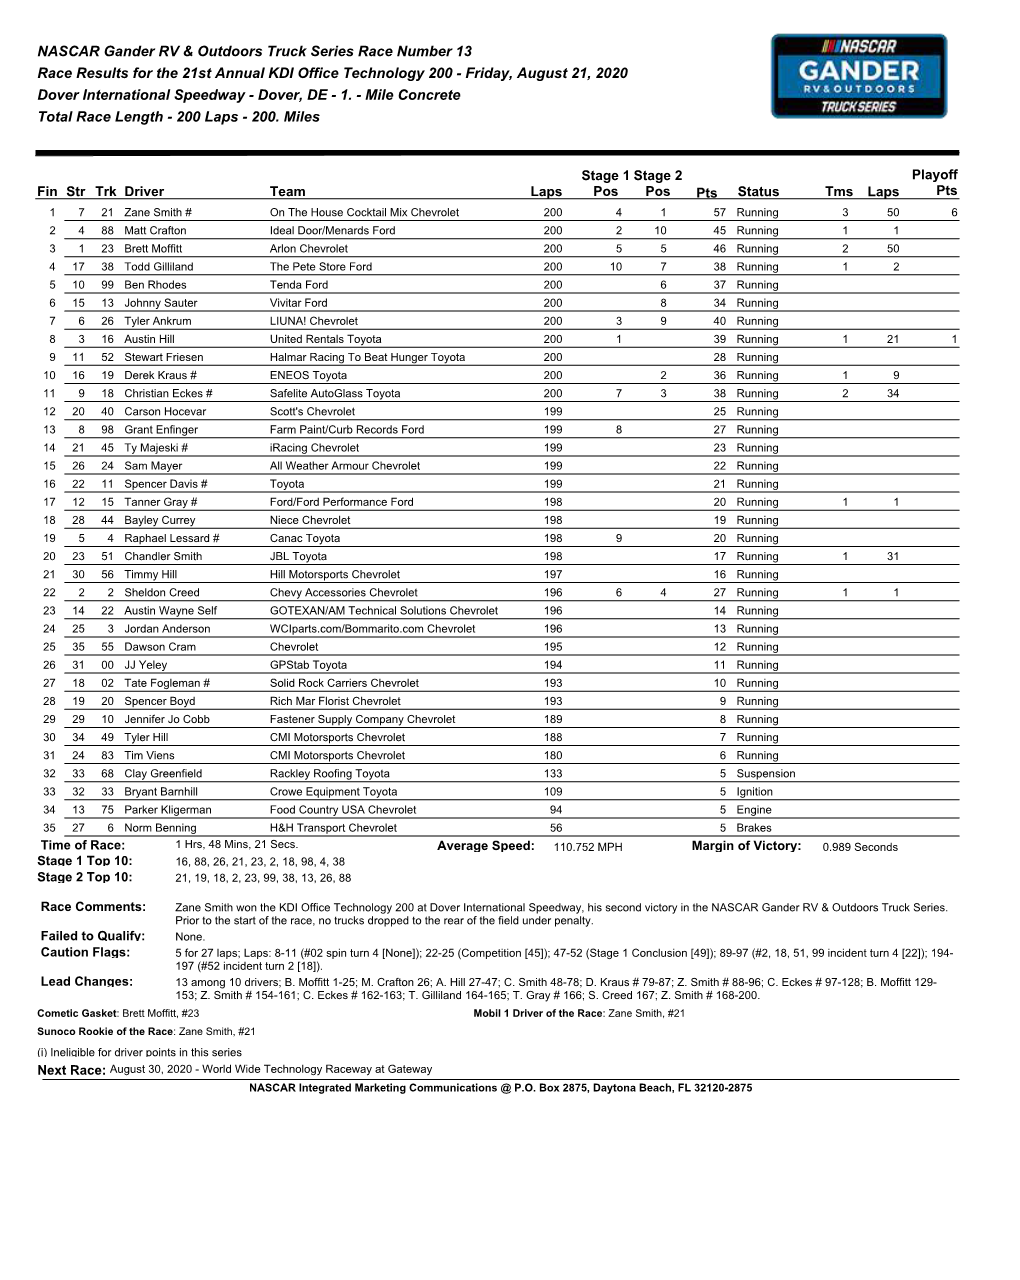 NASCAR Gander RV & Outdoors Truck Series Race Number 13 Race Results for the 21St Annual KDI Office Technology